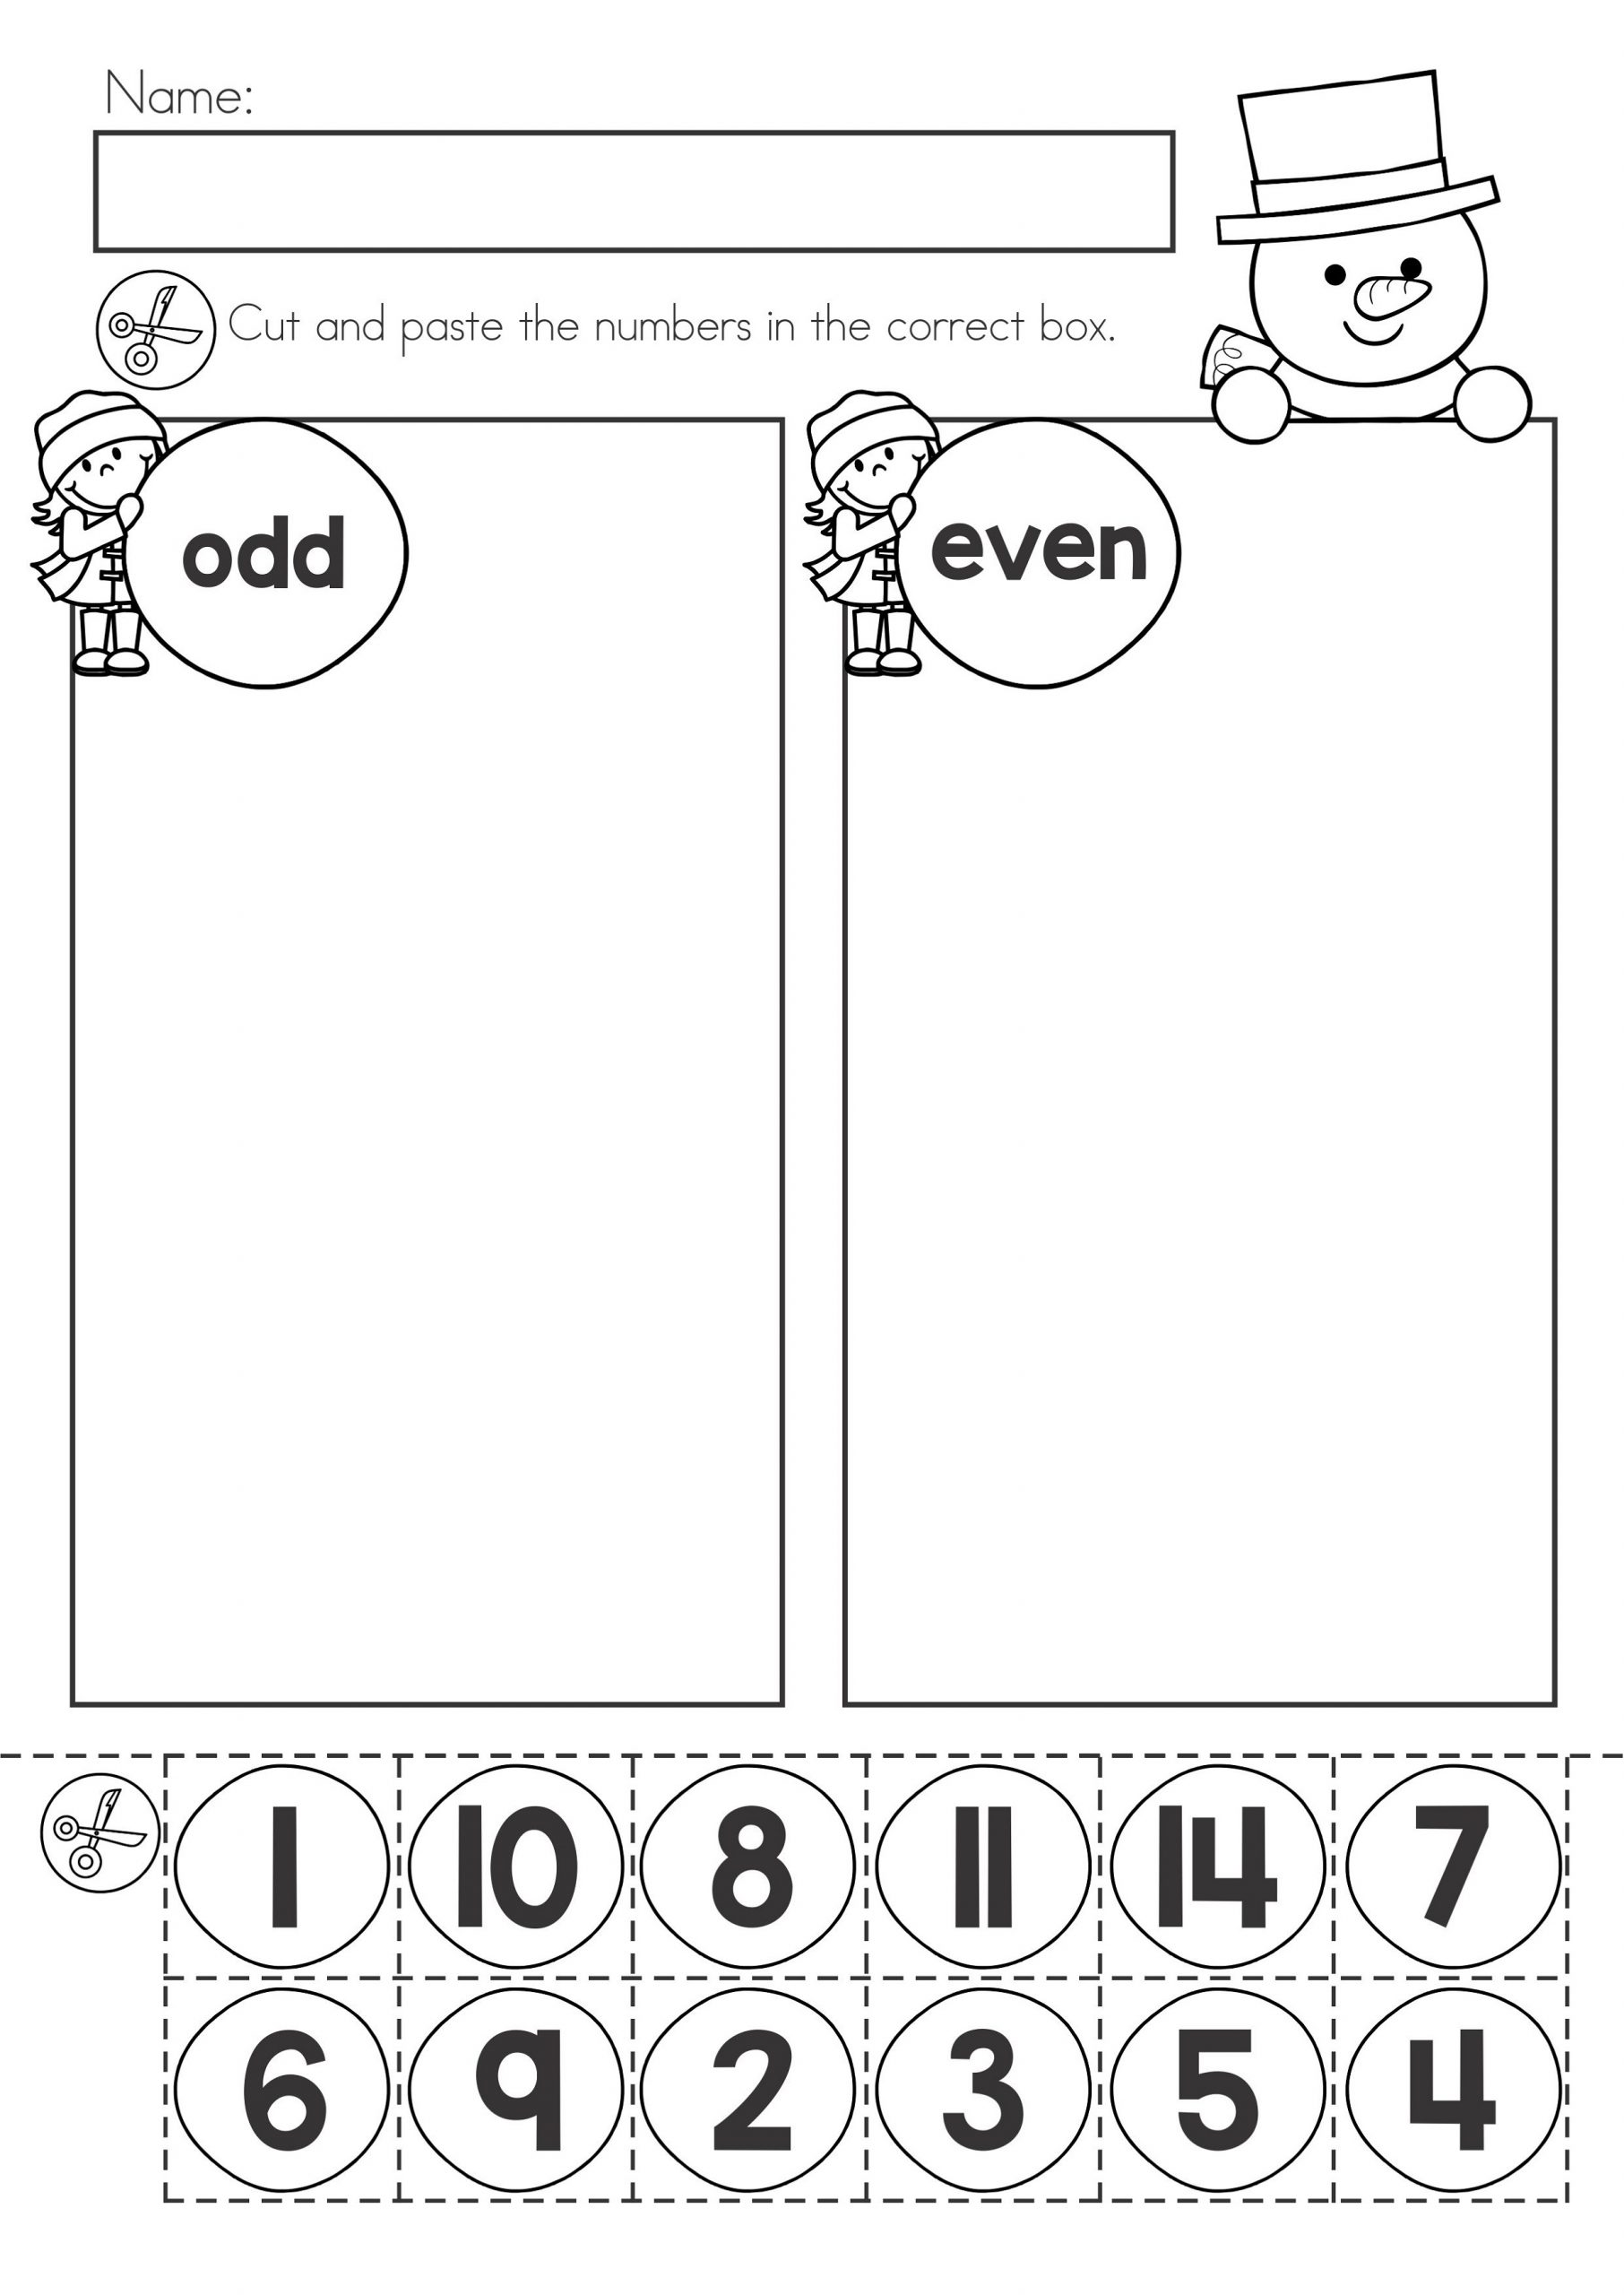 Even And Odd Number Worksheets 101 Activity